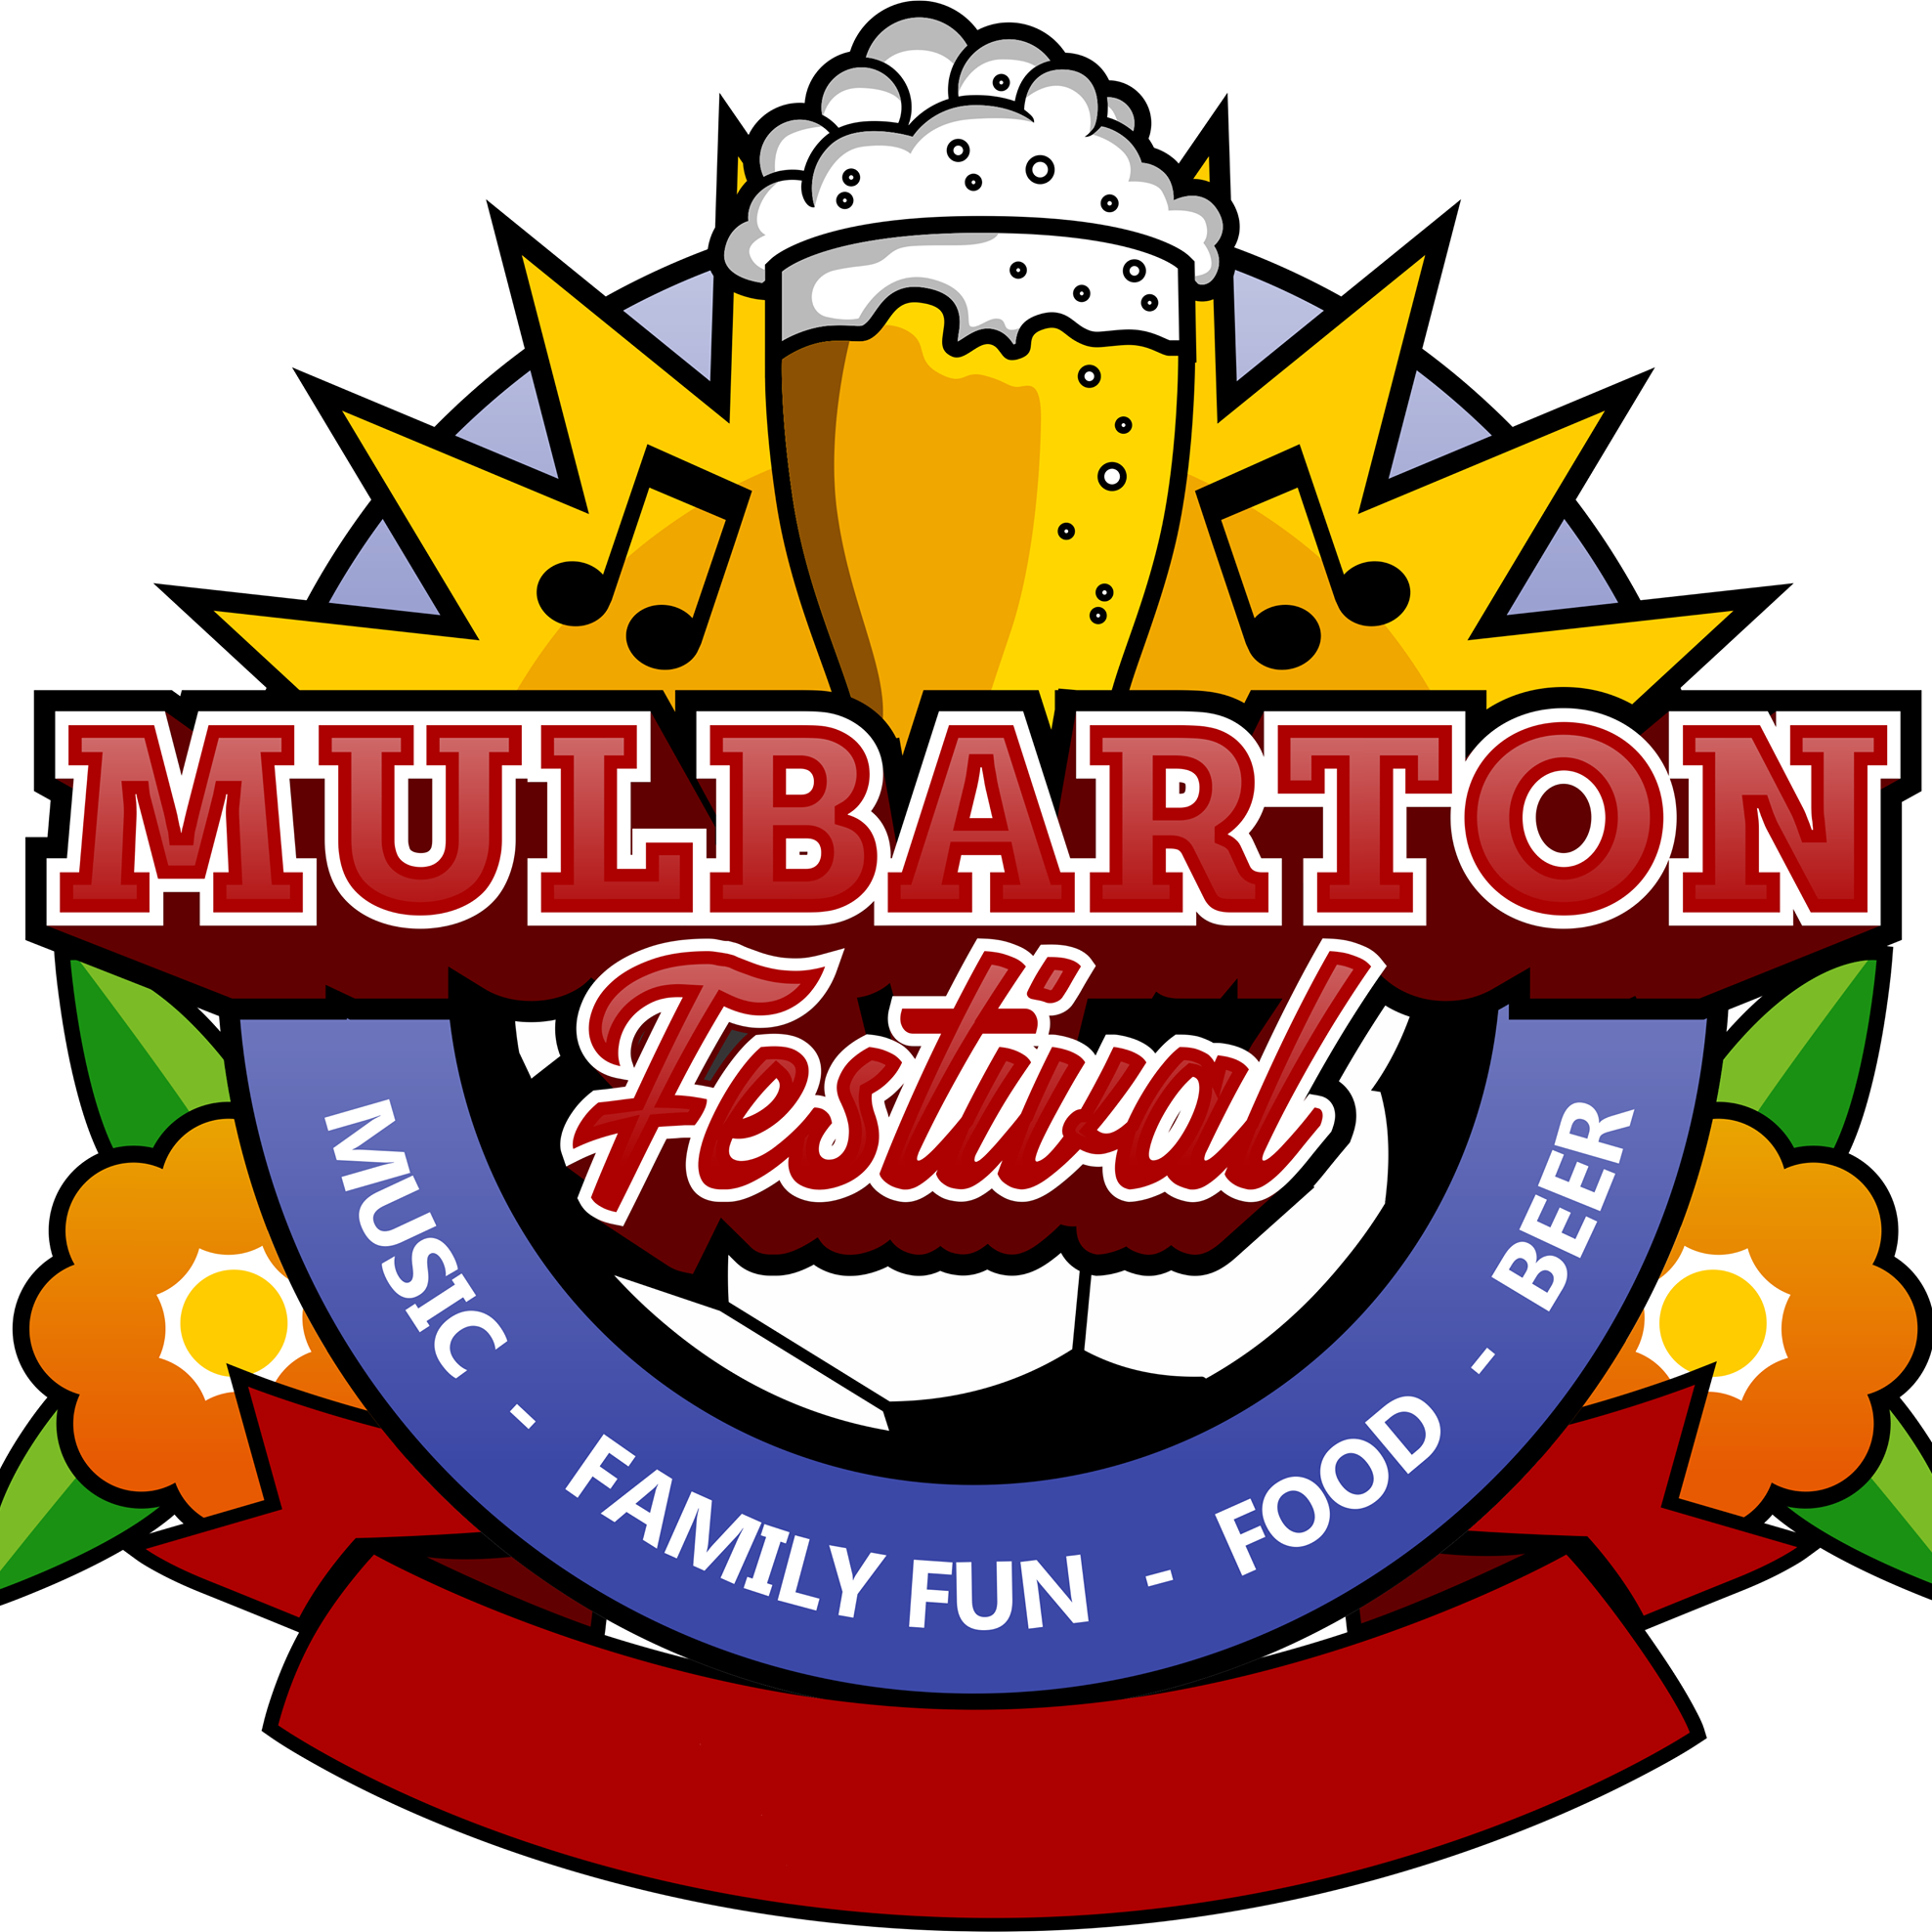 Shield goes to the Mulbarton Festival!